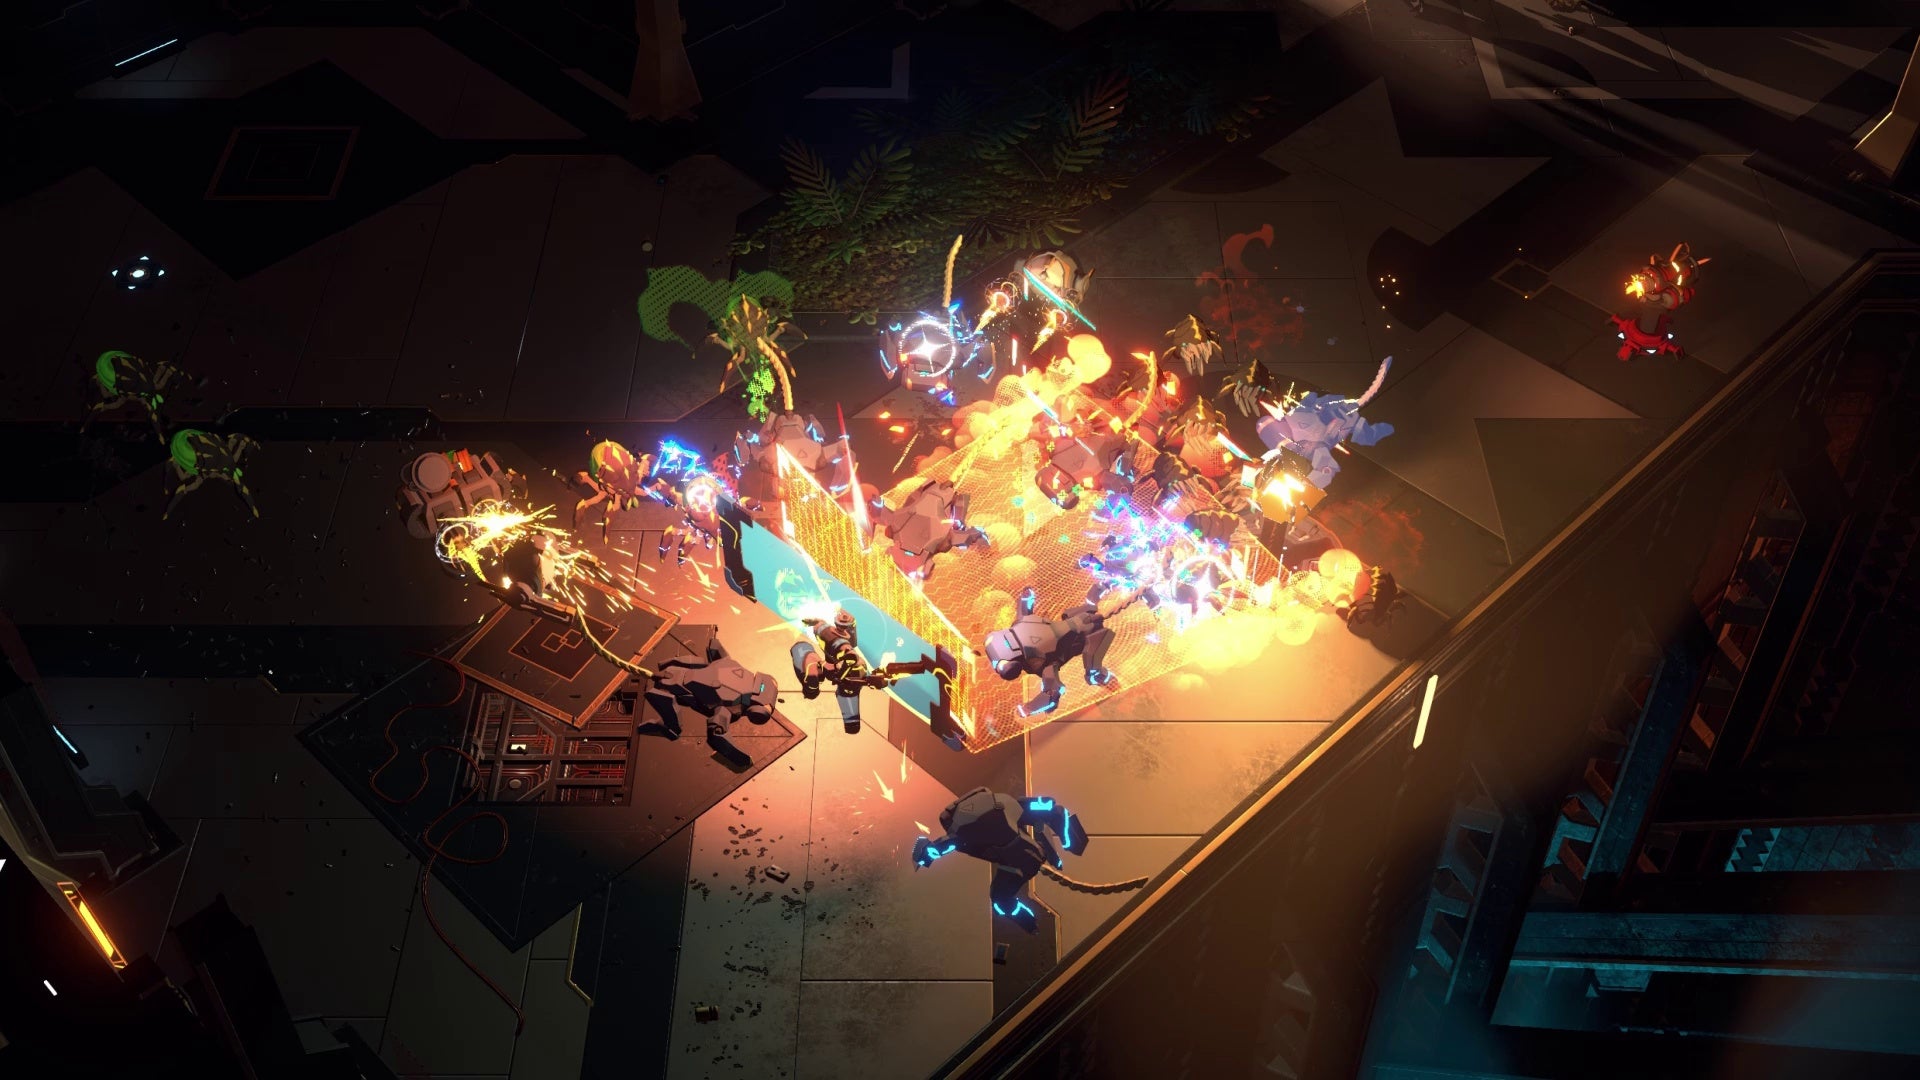 A screenshot of Endless Dungeon showing a futuristic environment from an isometric perspective. At the centre of the image is a melee between players and many monsters, with fire and smoke and magic effects illuminating the scene.